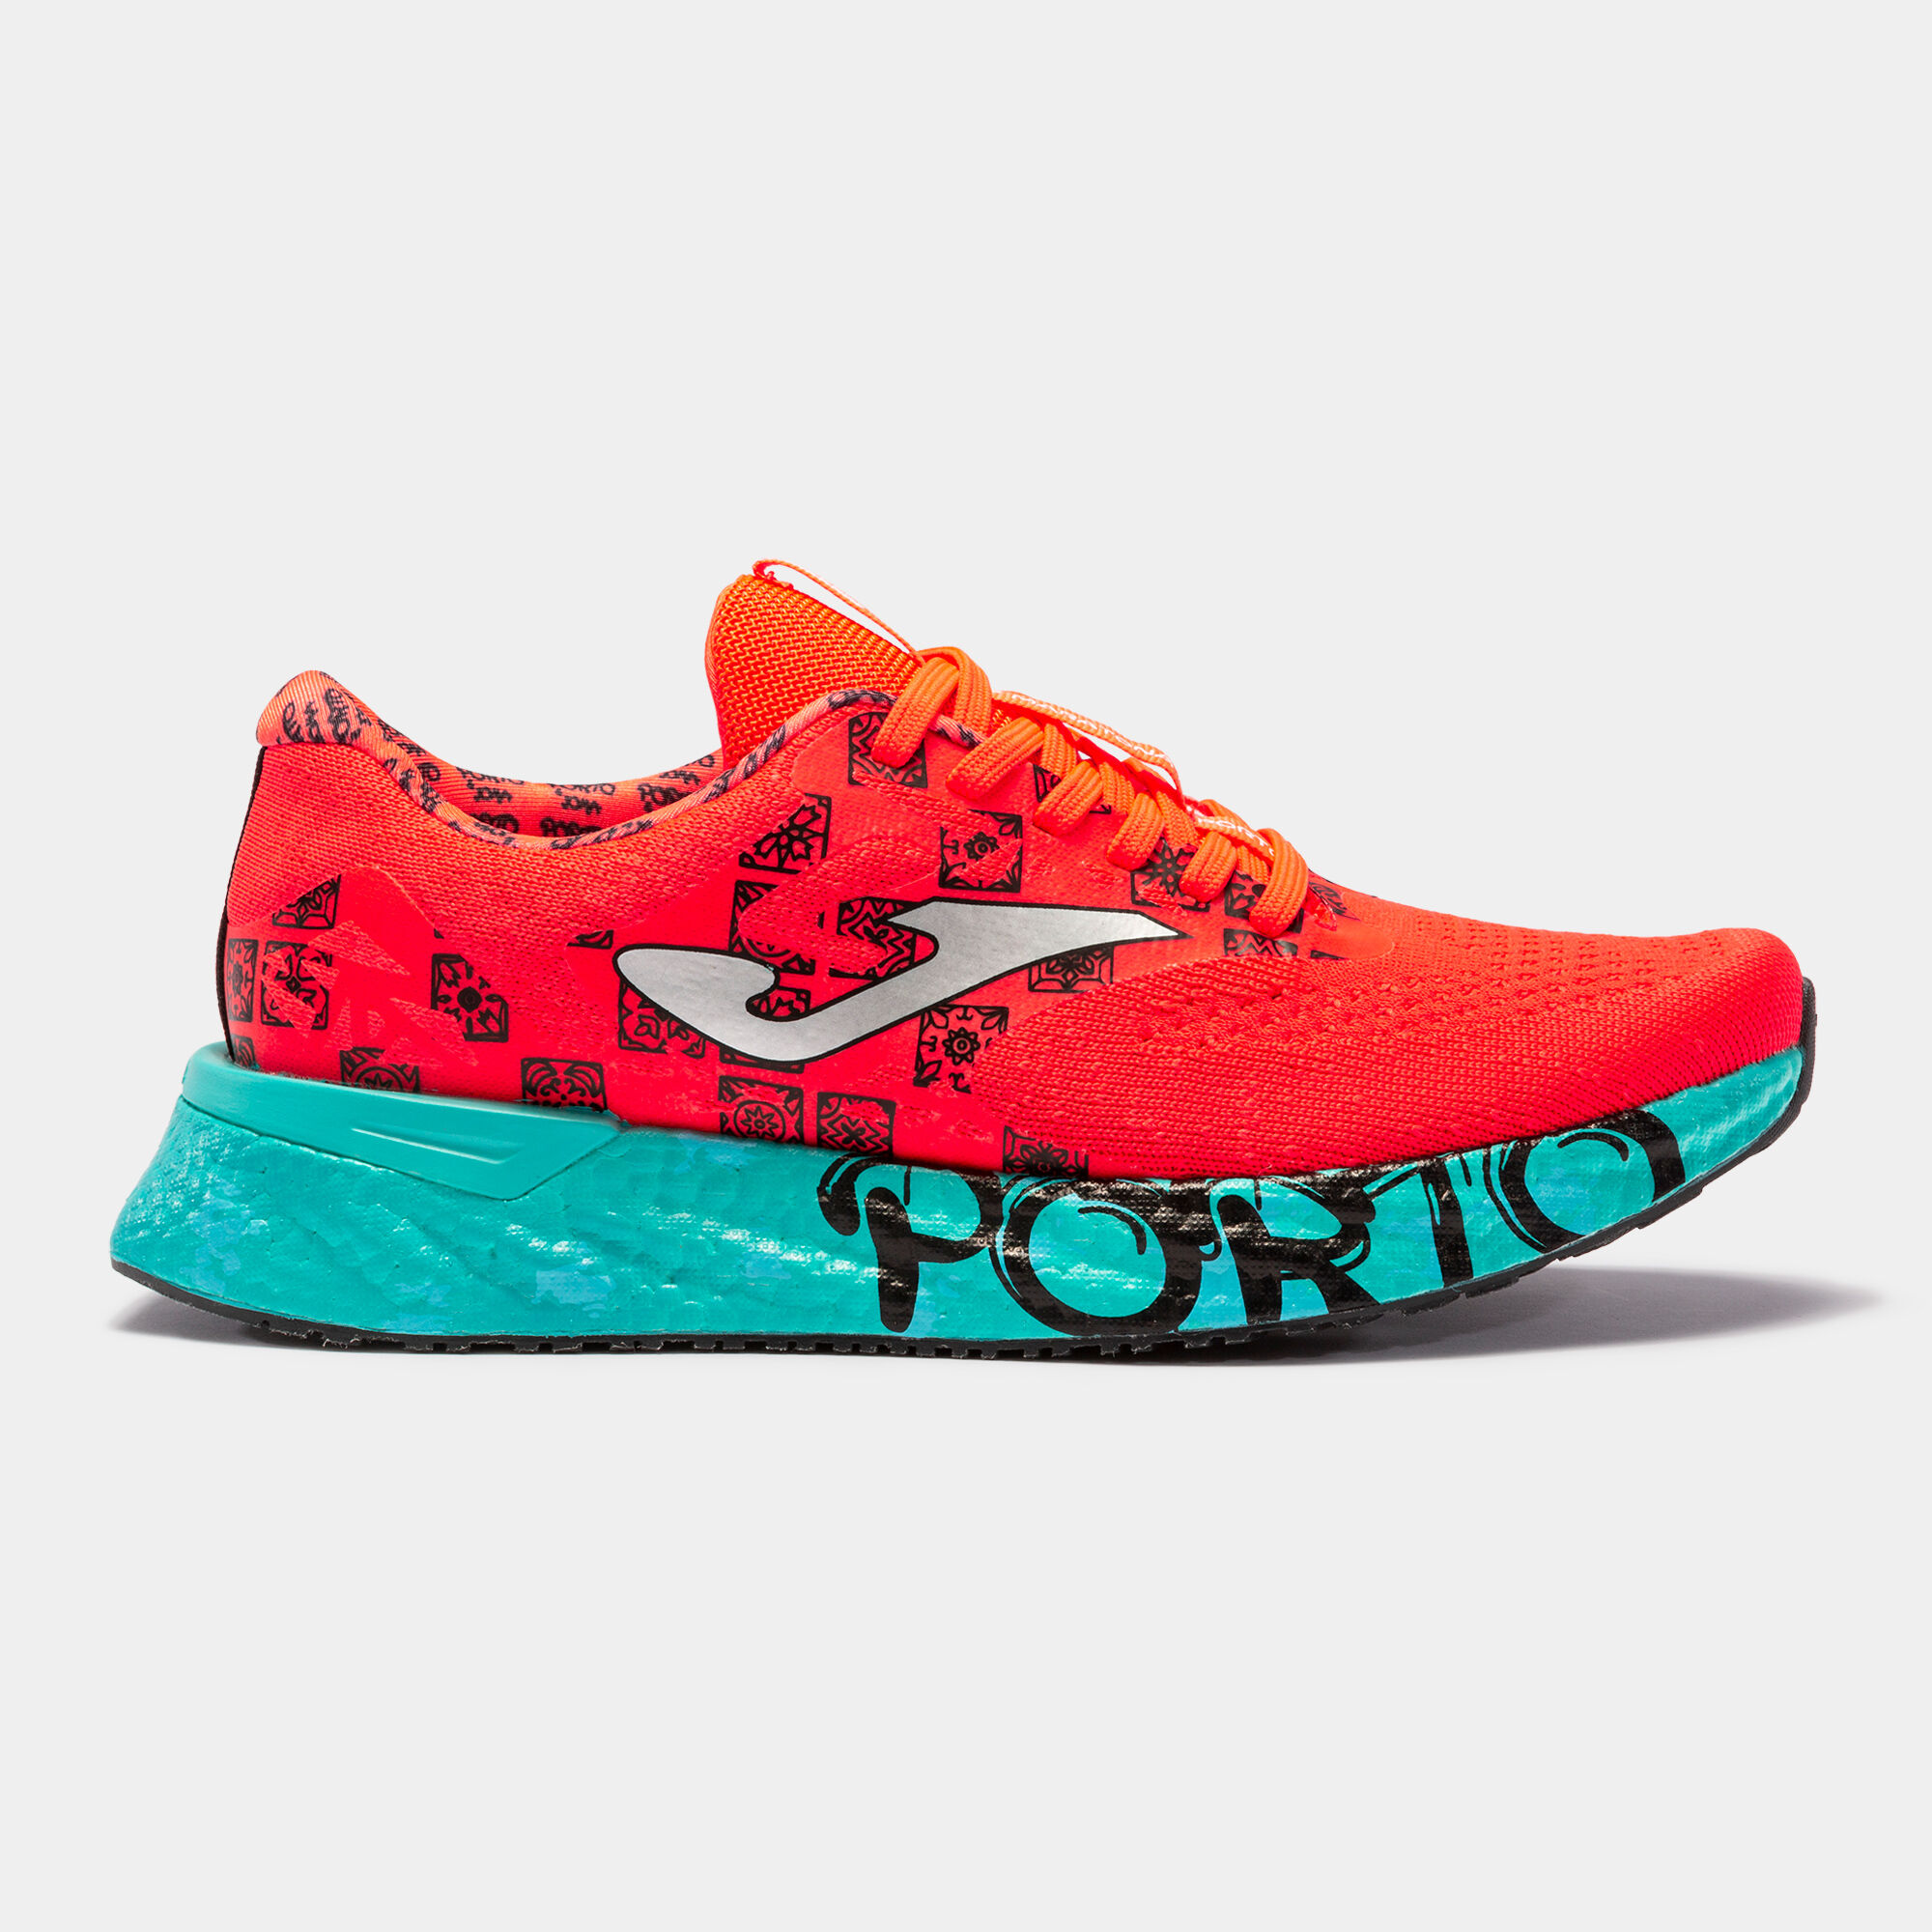 Running shoes Storm VIper Oporto coral turquoise